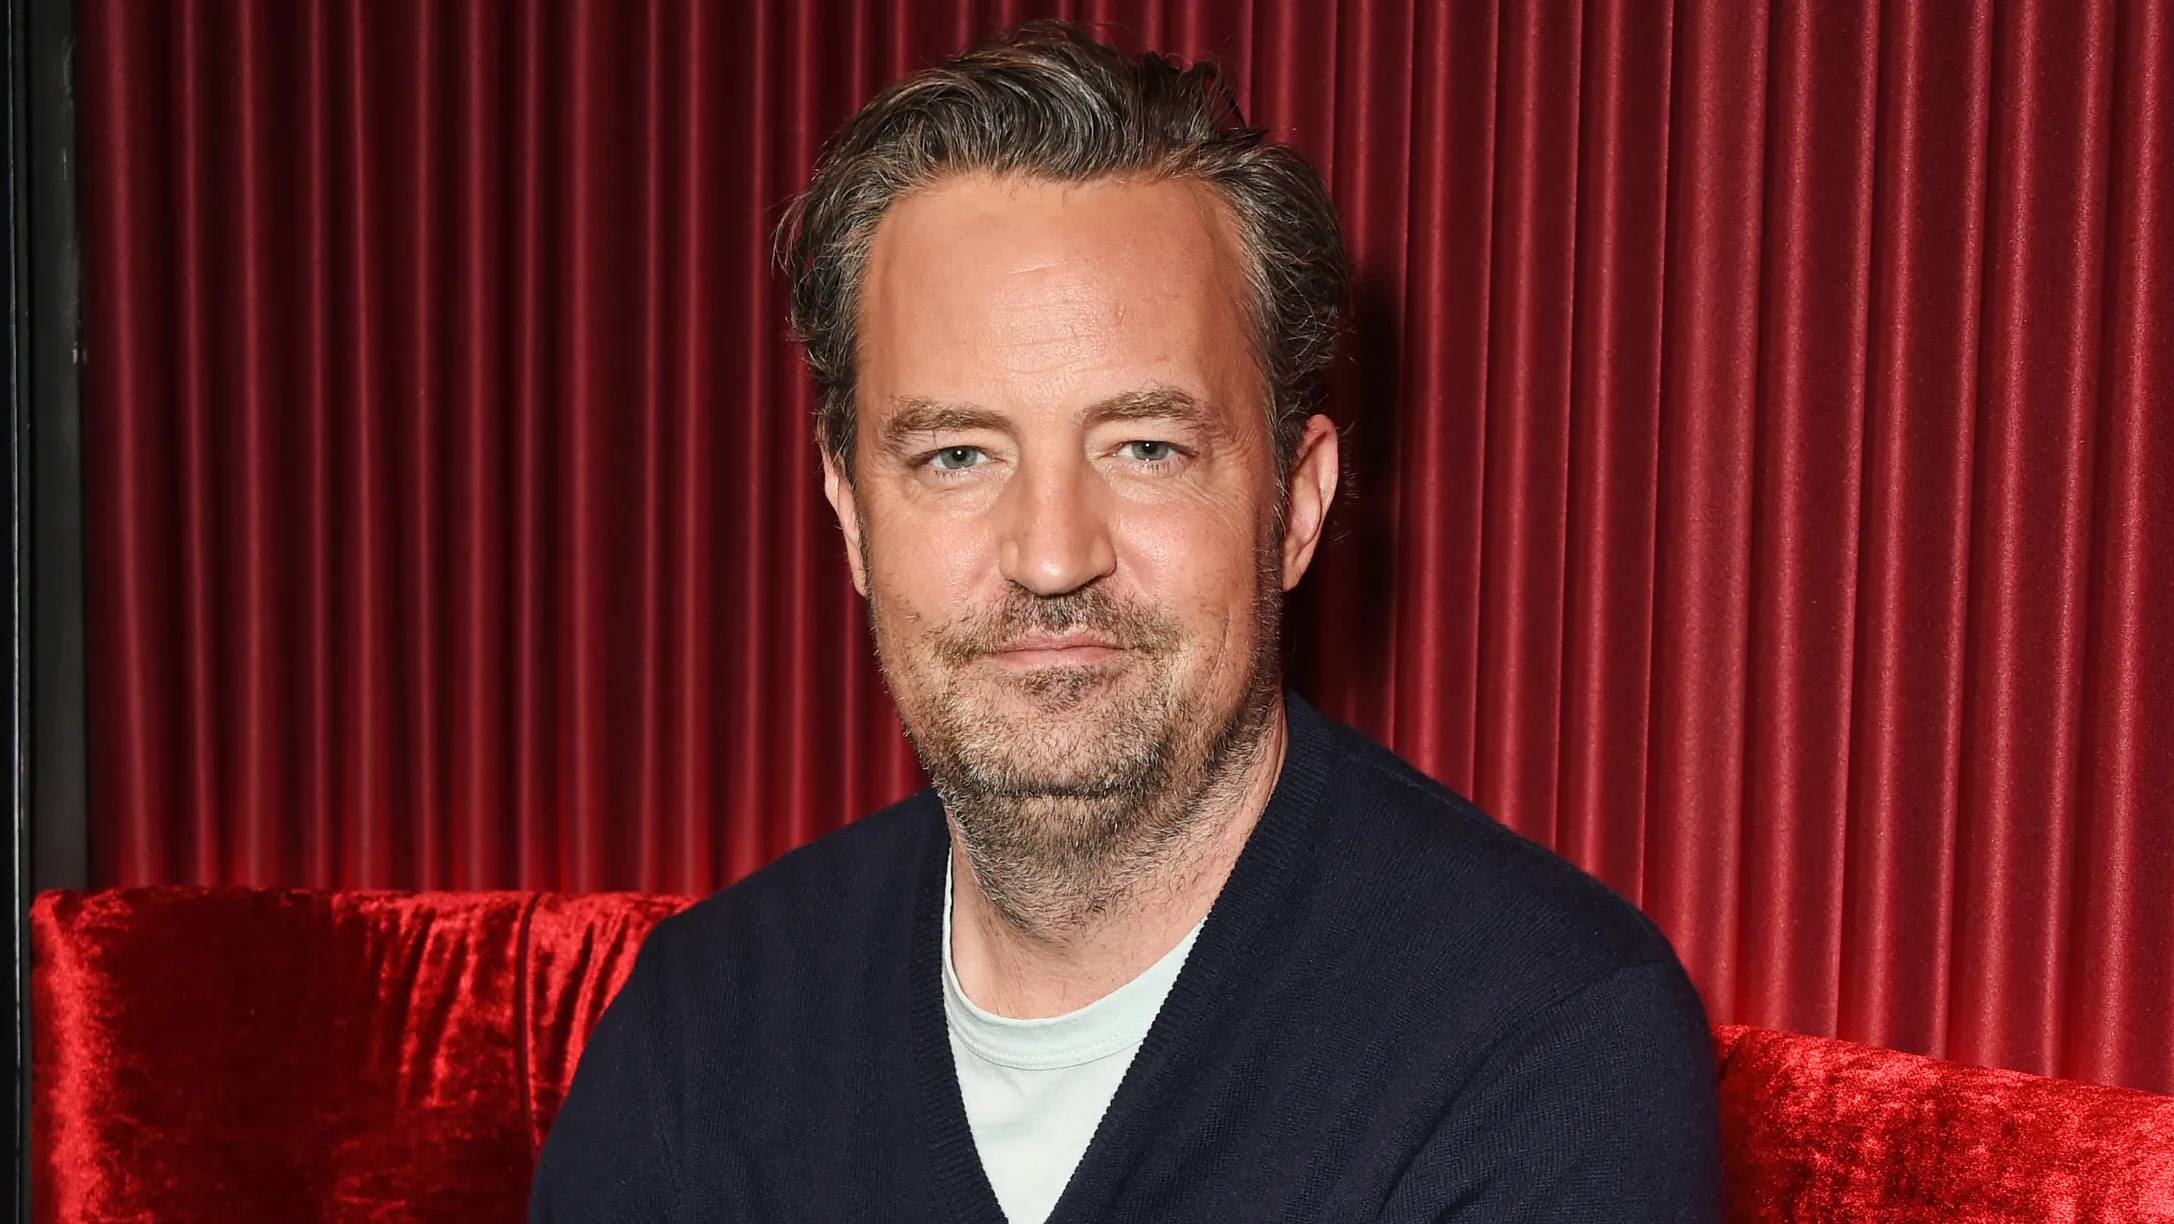 Matthew Perry’s Death From Acute Ketamine Effects Investigated by DEA, LAPD